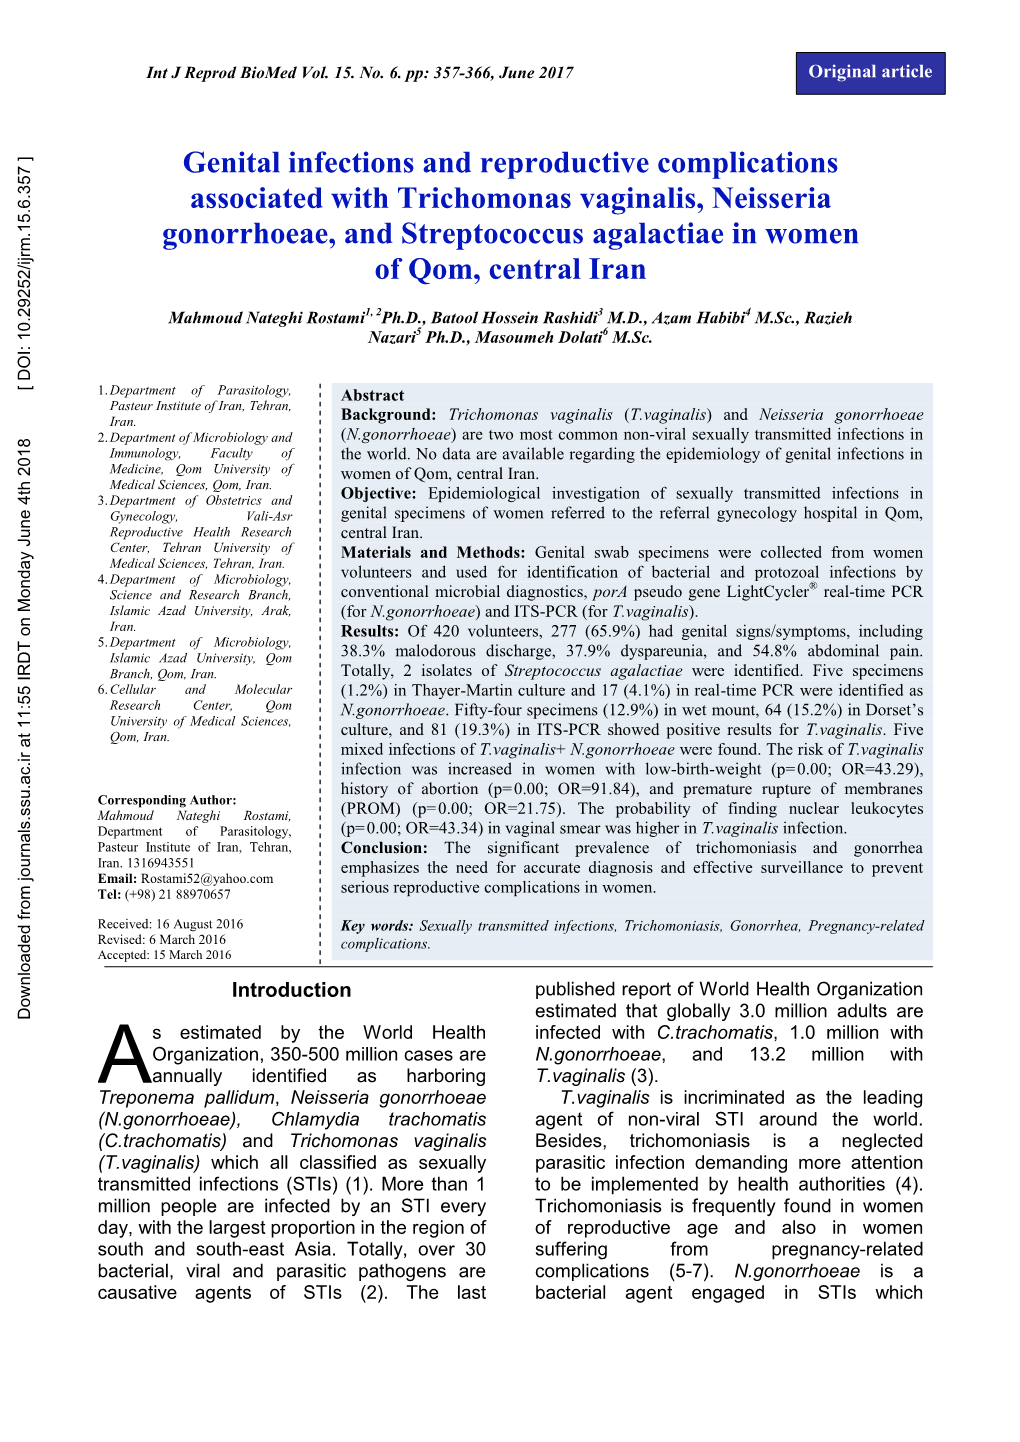 Genital Infections and Reproductive Complications Associated With